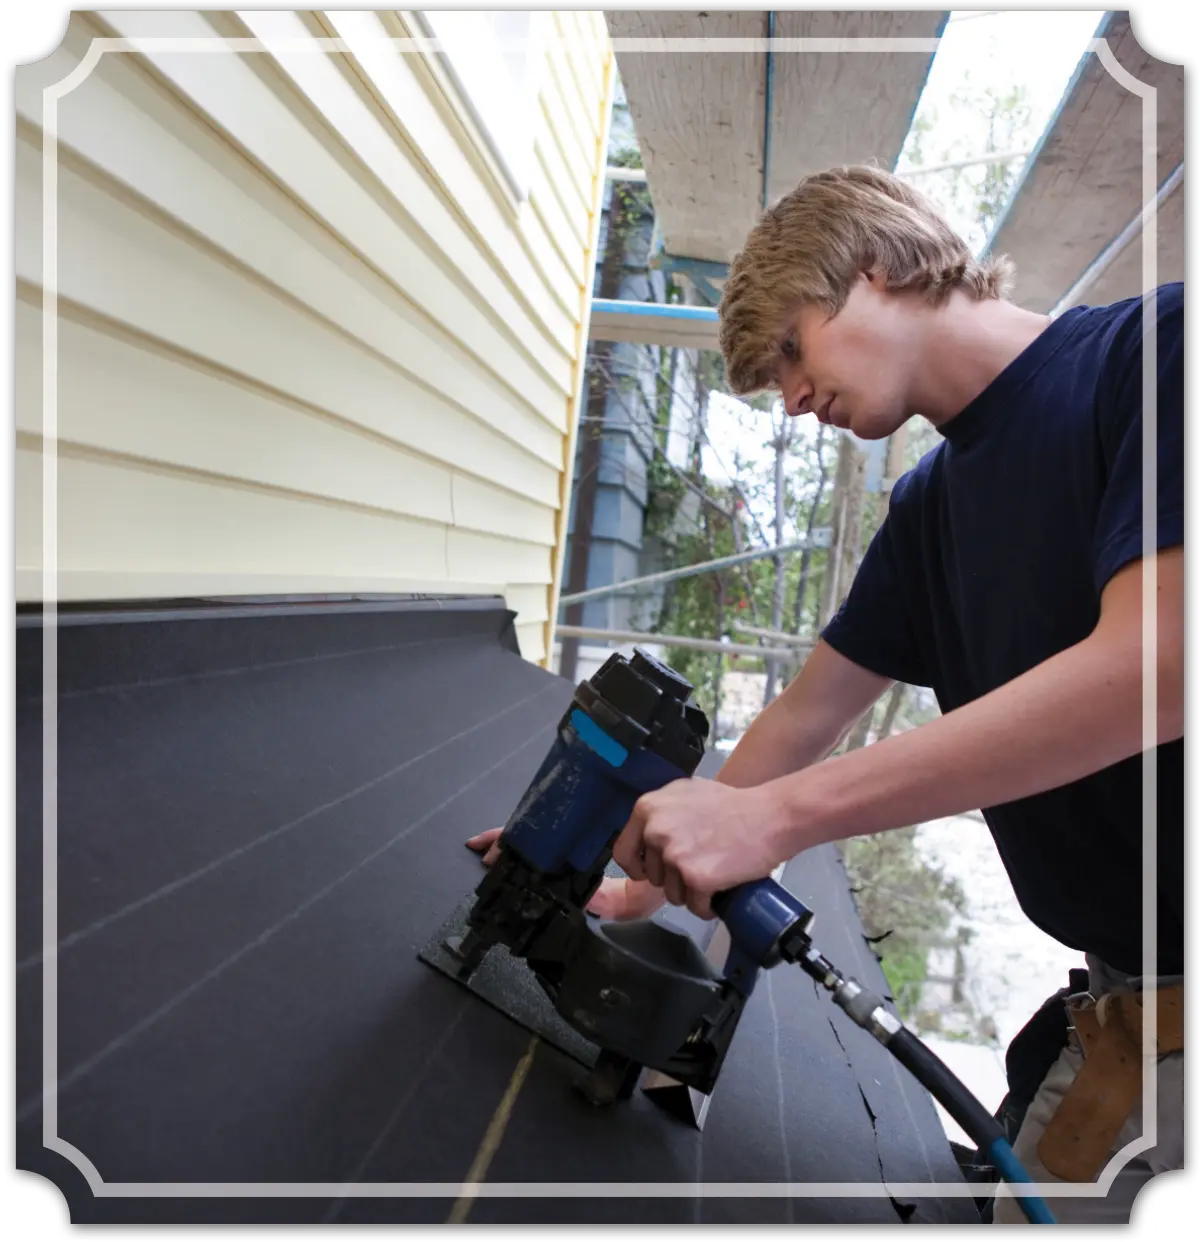 Portrait photograph of a teenage boy using a nail gun on a construction site black cover sheet outside a home